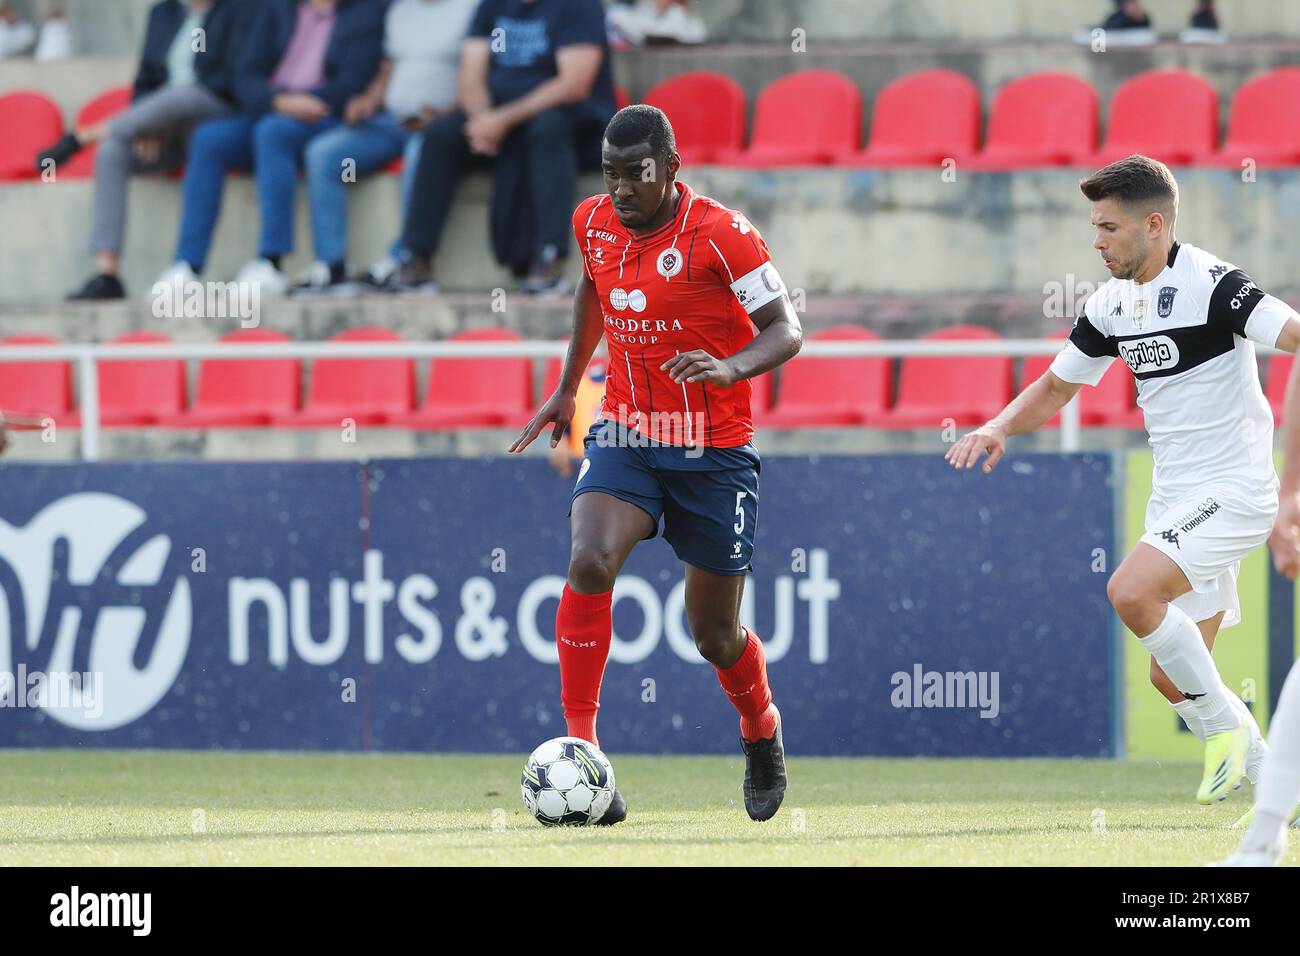 Ze Pedro of UD Oliveirense in action during the Liga 2 Portugal match  News Photo - Getty Images